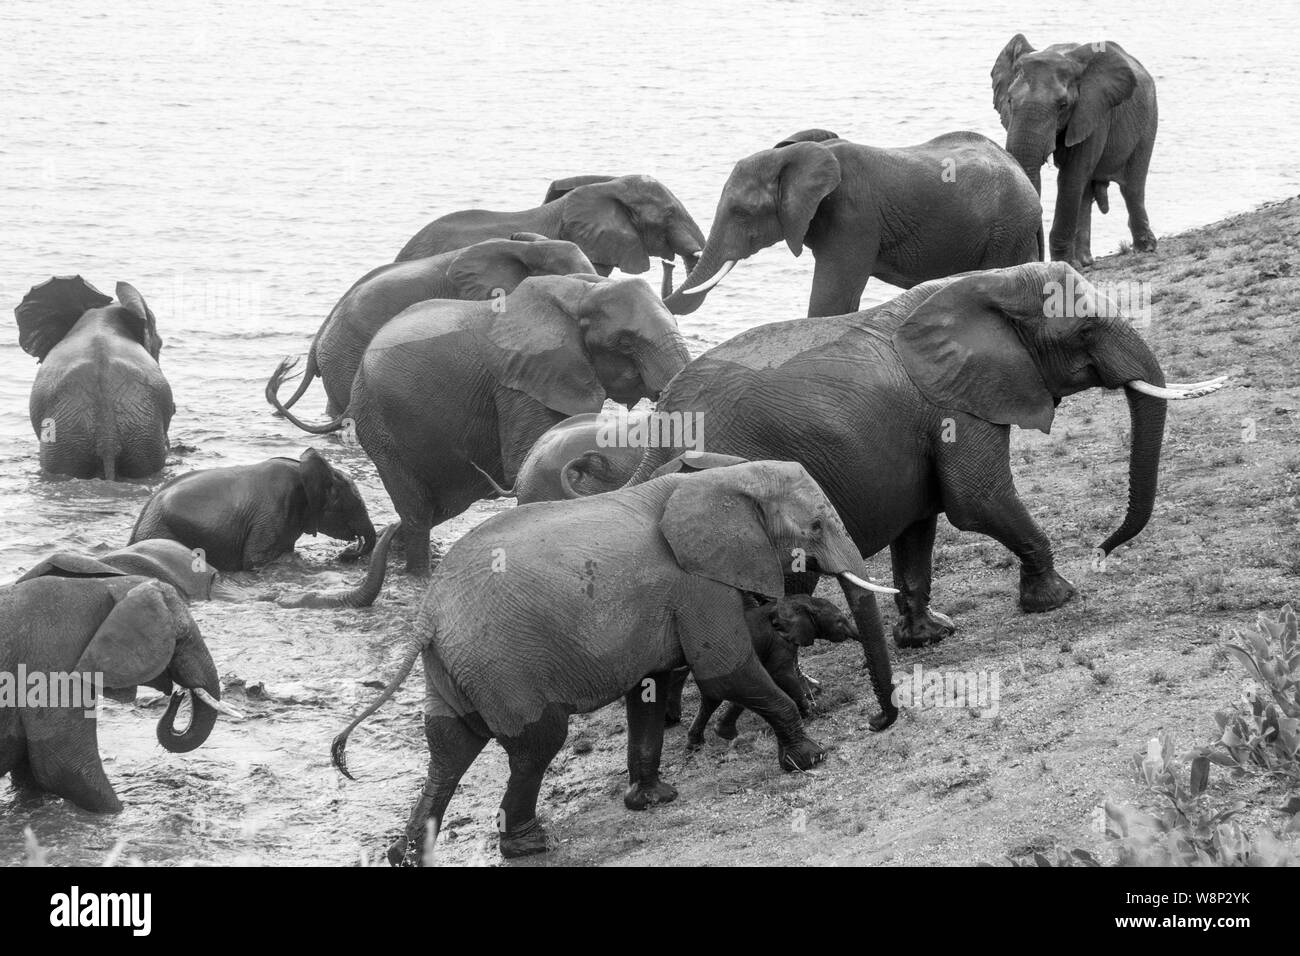 A Parade of Elephants at a Watering Hole in Black and White -  a large family roaming in the wild Stock Photo